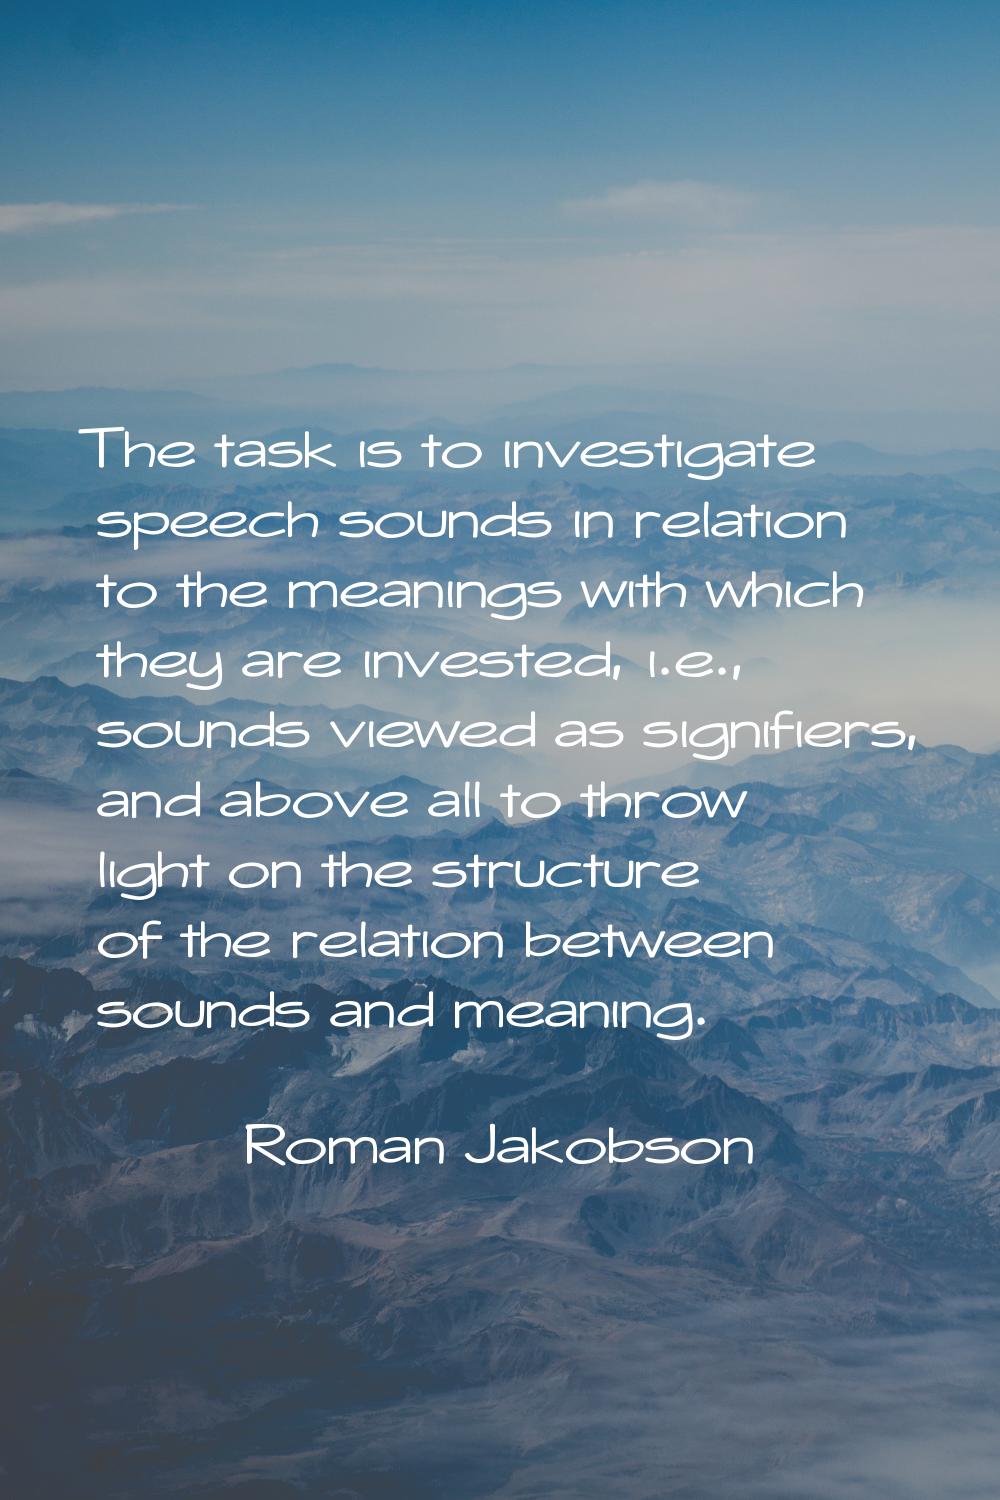 The task is to investigate speech sounds in relation to the meanings with which they are invested, 